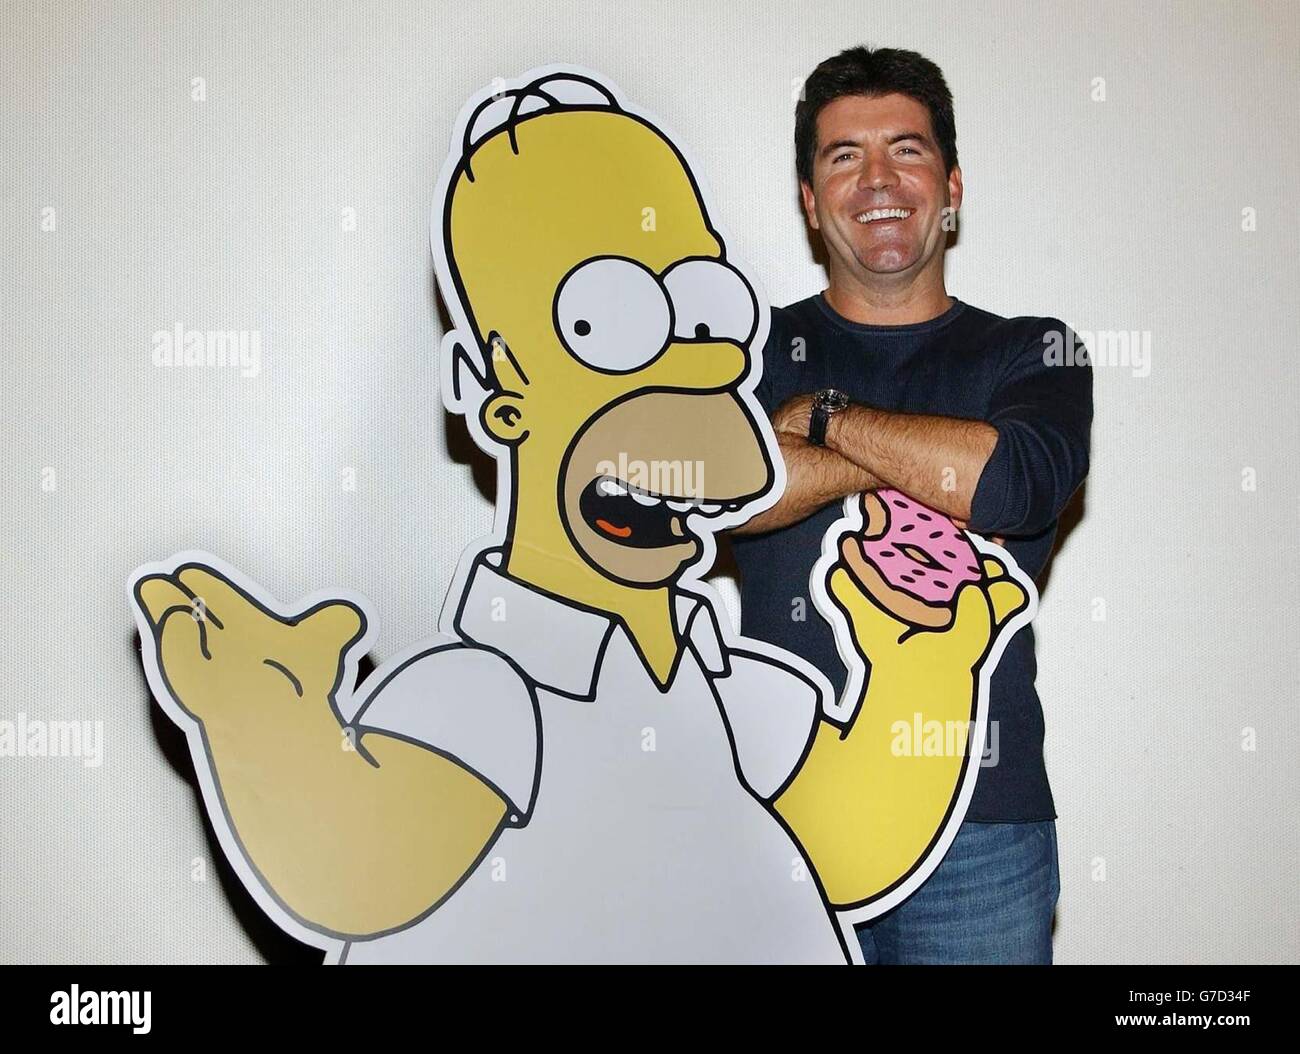 Simon Cowell poses with a cardboard cut-out of cartoon character Homer Simpson, as he arrives for the UK premiere screening of Smart and Smarter - a new episode of The Simpsons on Sky One - in which he stars, at the Rex Cinema and Bar, Rupert Street, central London. Stock Photo